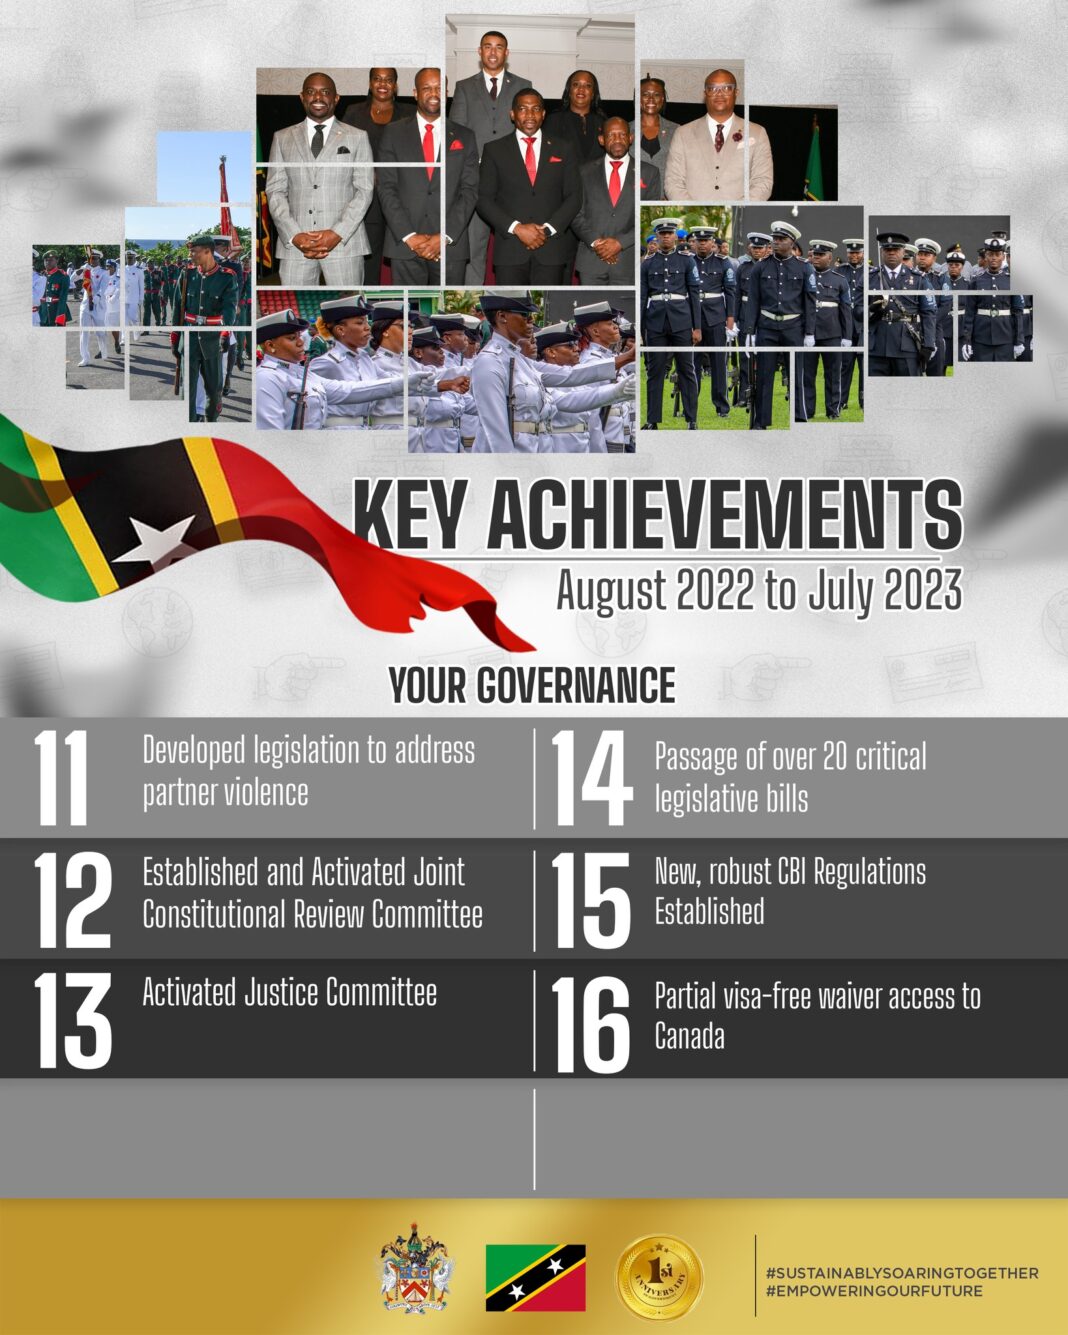 St Kitts and Nevis: PM Dr Terrance shares 1-year key achievements of Labour Party